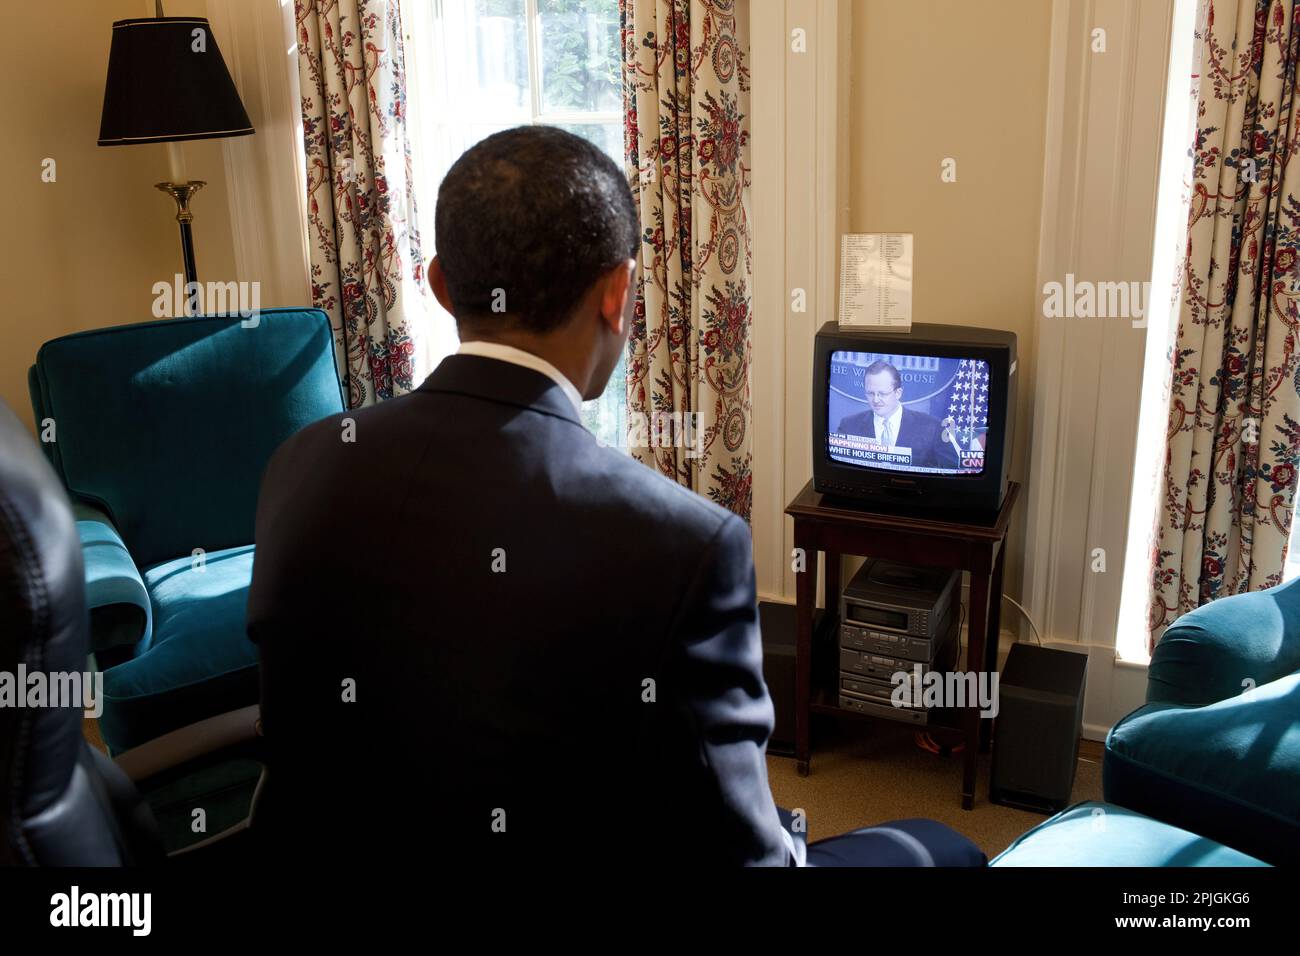 President Obama watches Press Secretary Robert Gibbs' first Press Briefing on television, in his private study off the Oval Office 1/22/09. .White House Official Photo by Joyce N. Boghosian Stock Photo